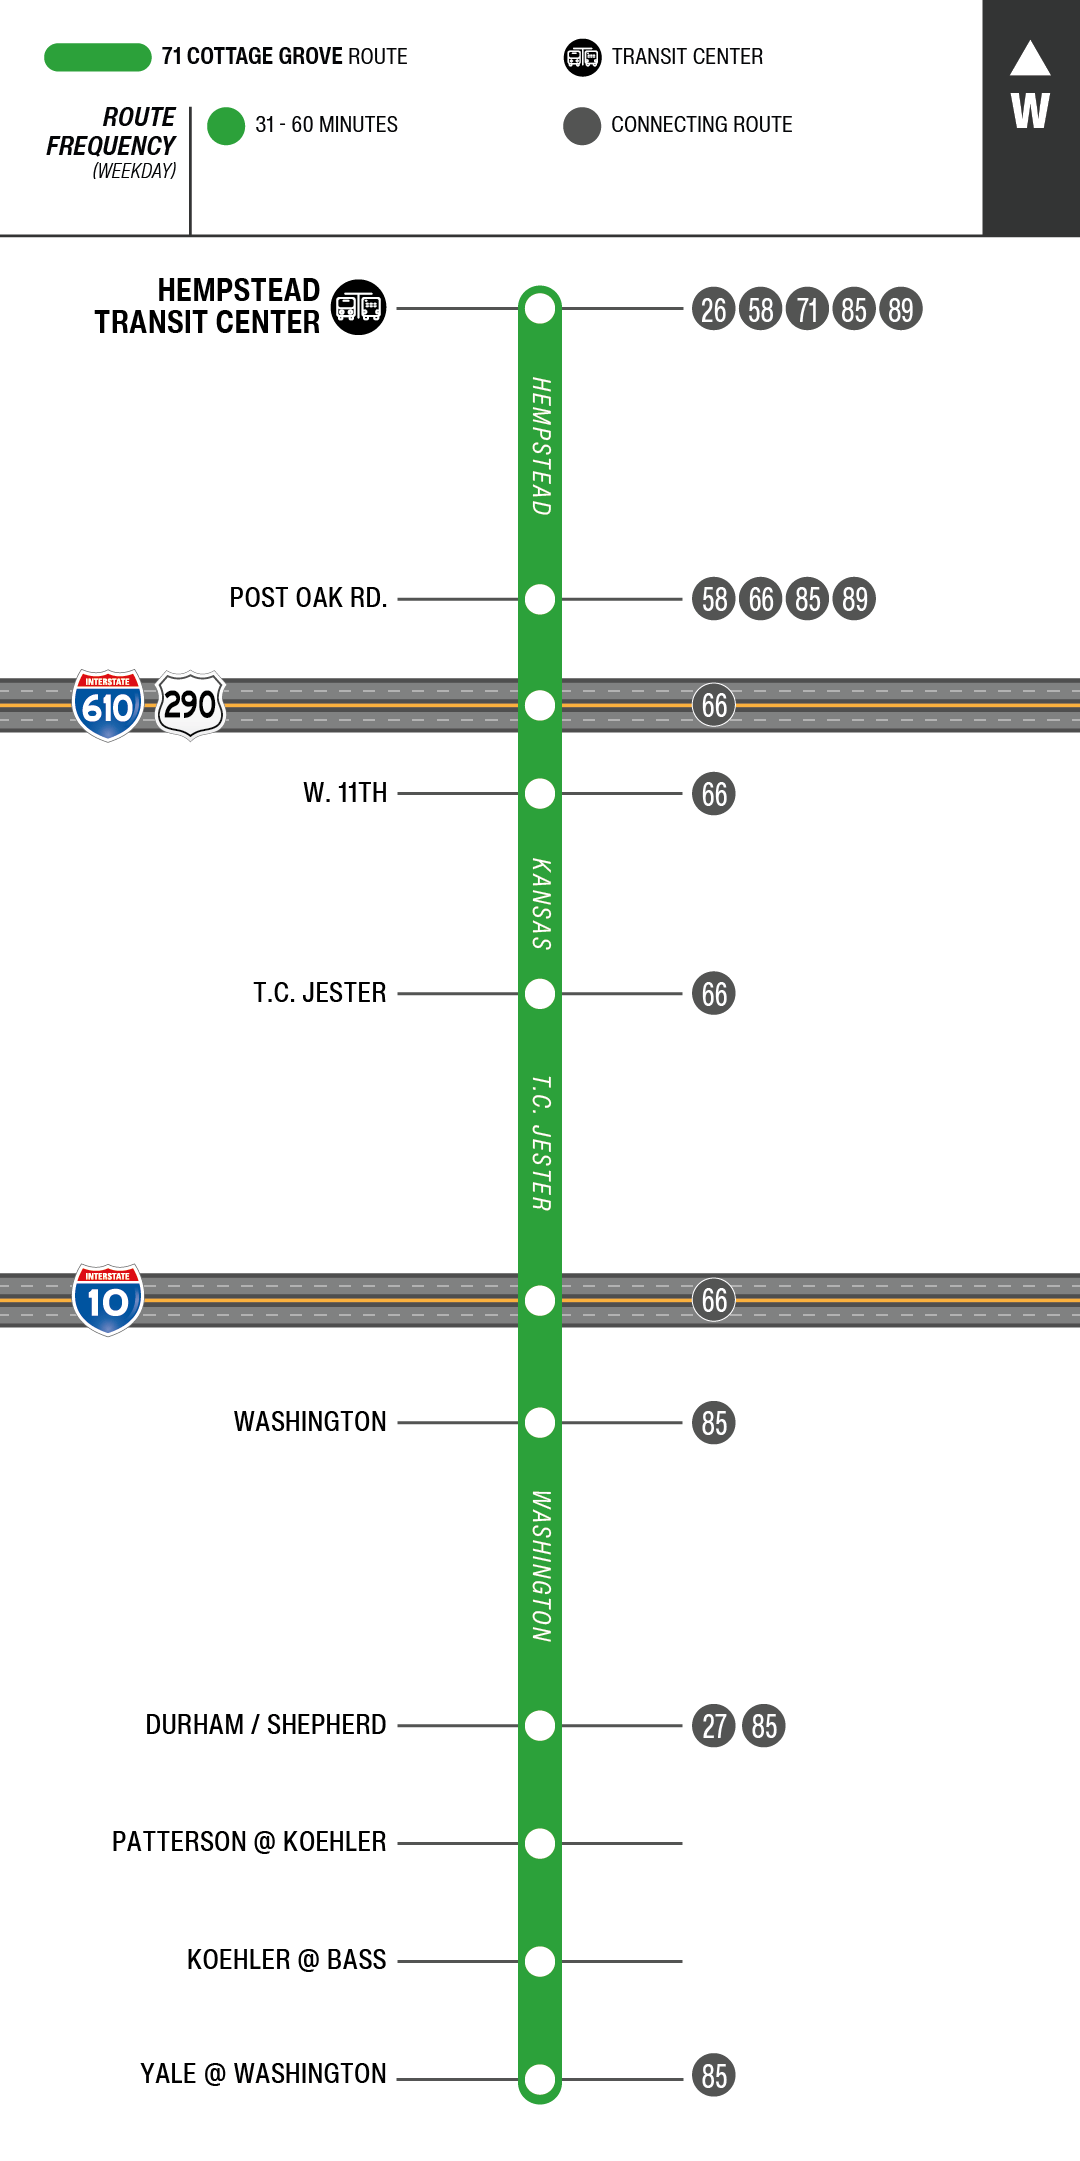 Route map for 71 Cottage Grove bus